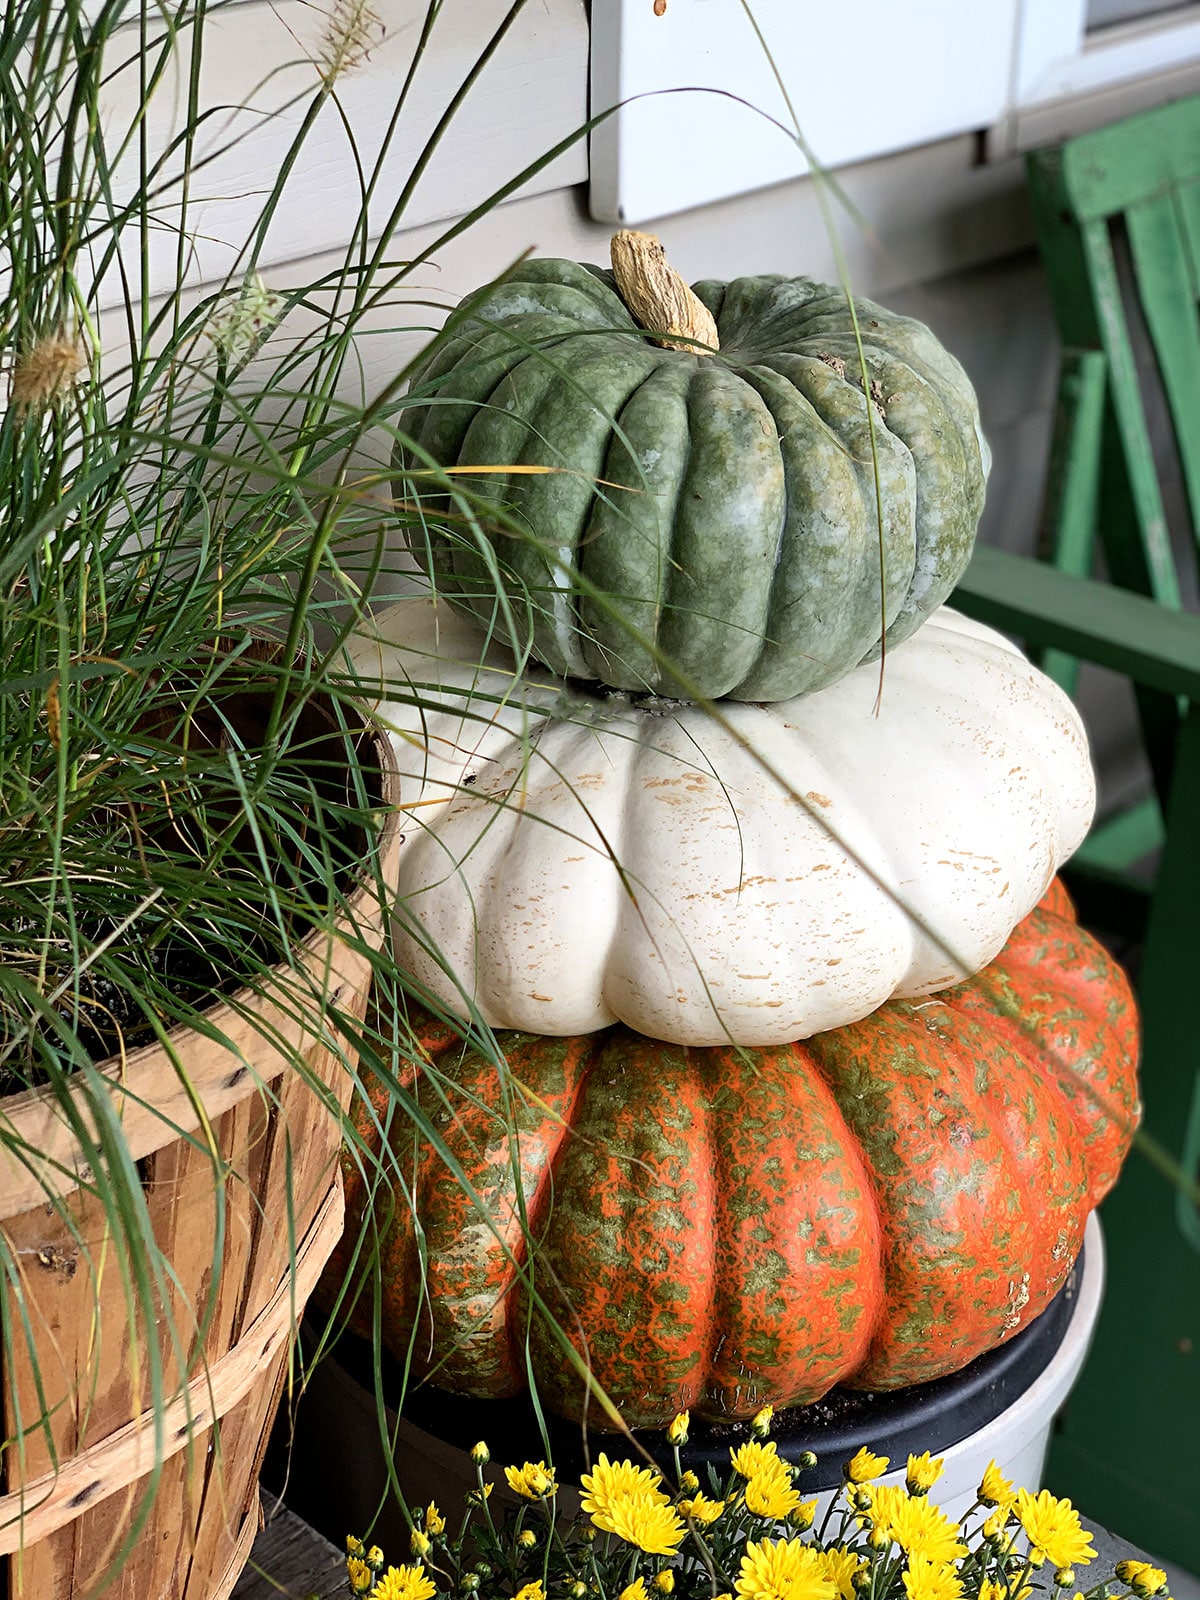 Pumpkins stacked on top of each other as fall decor.